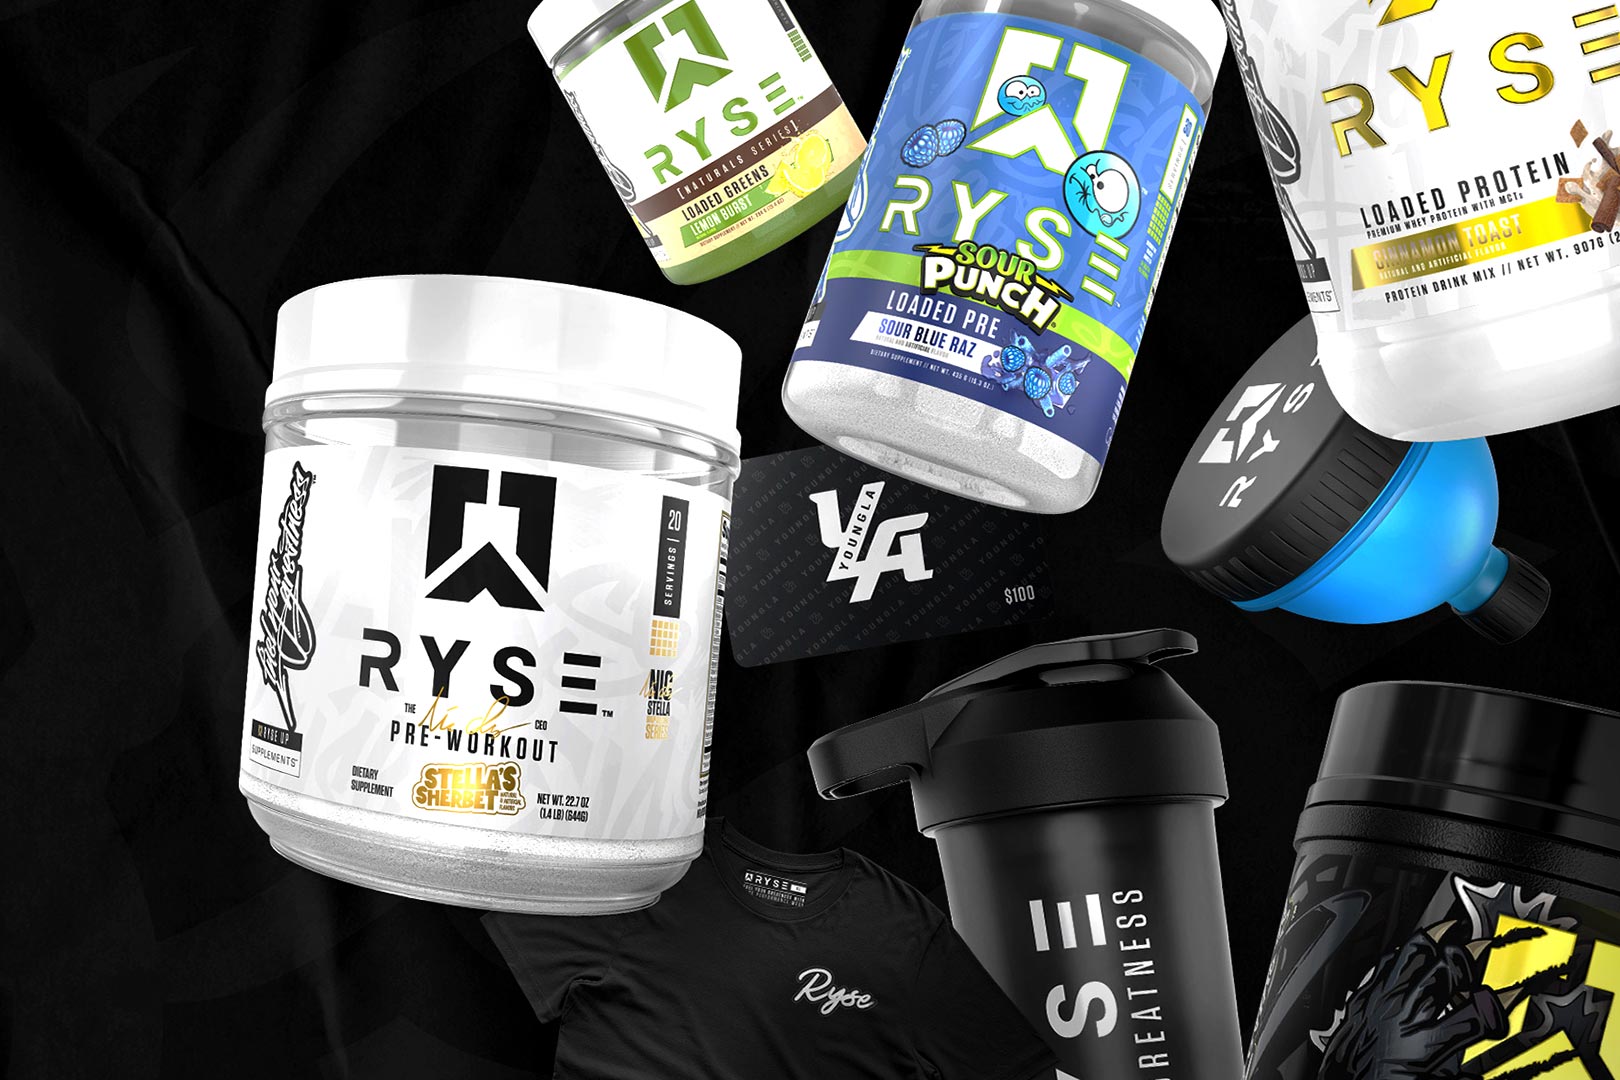 Where To Buy The Ryse Ceo Pre Workout